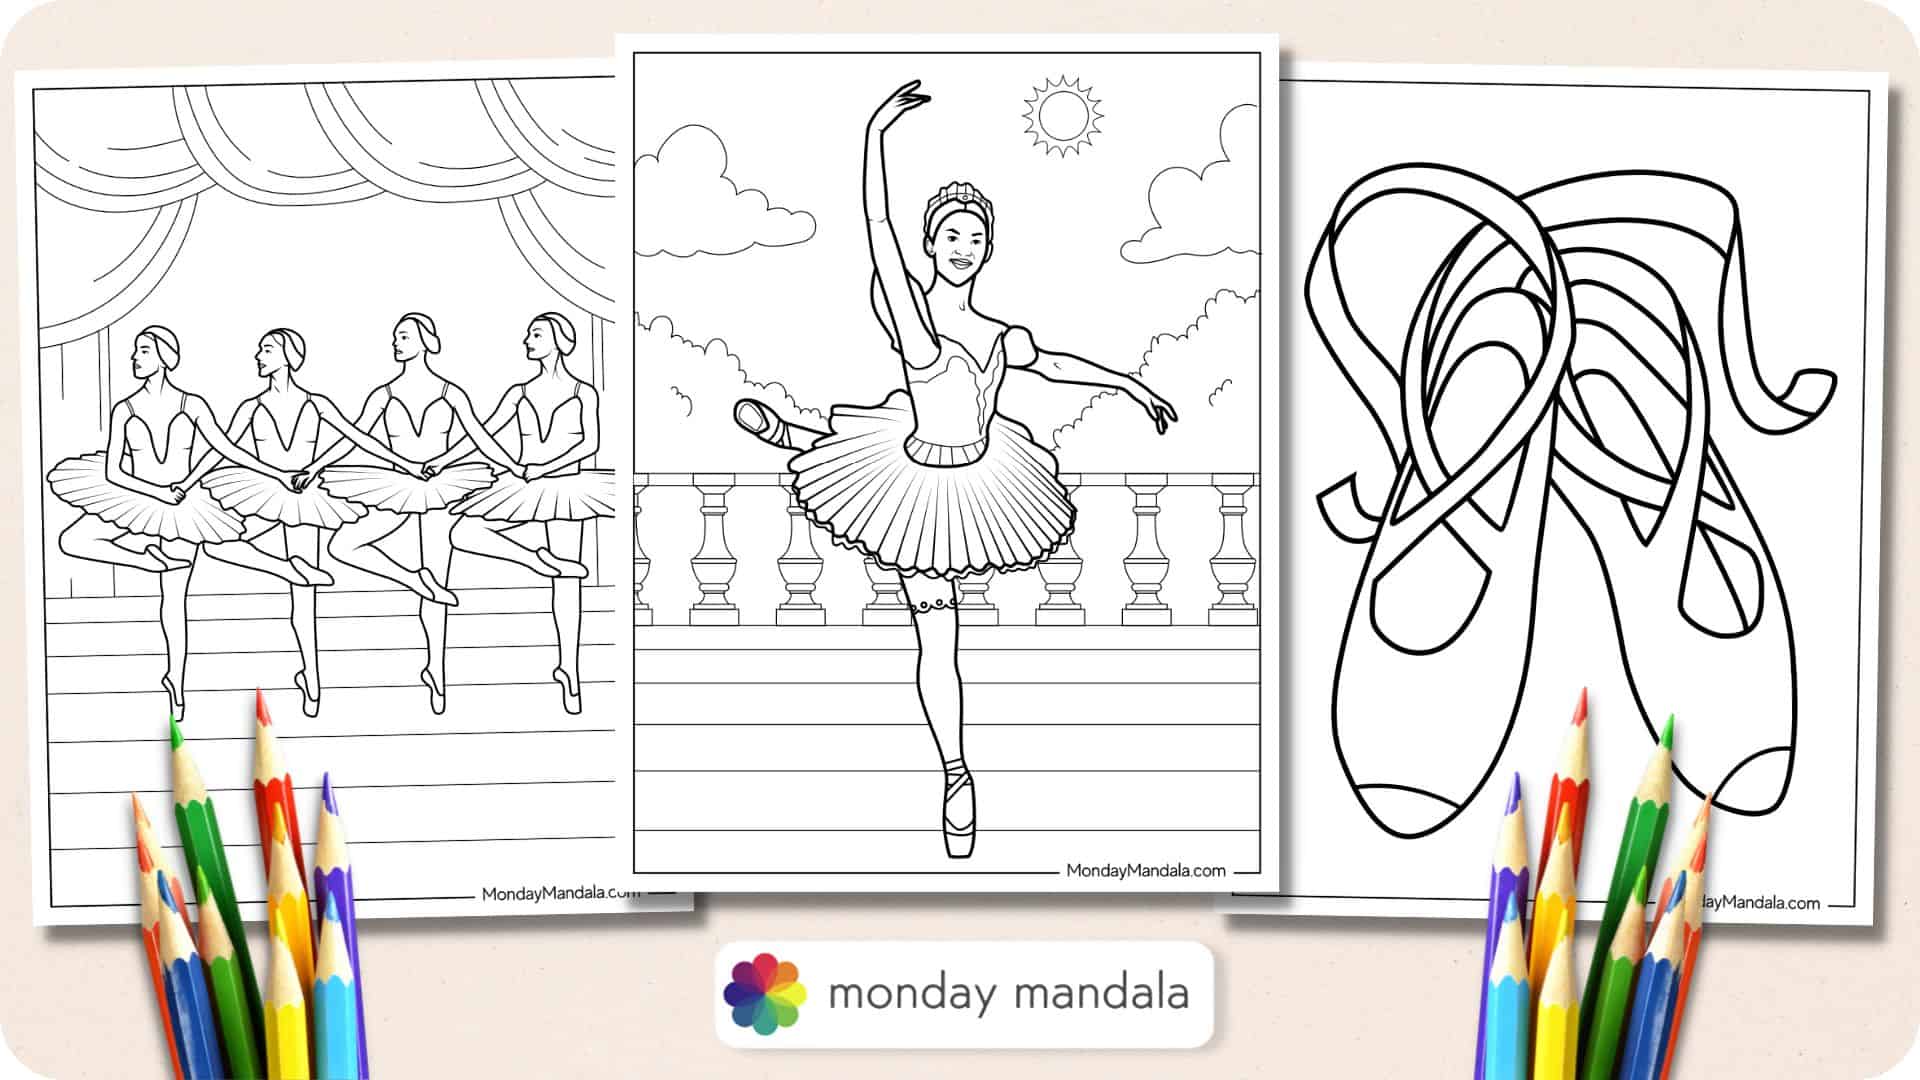 Ballerina coloring pages free pdf printables